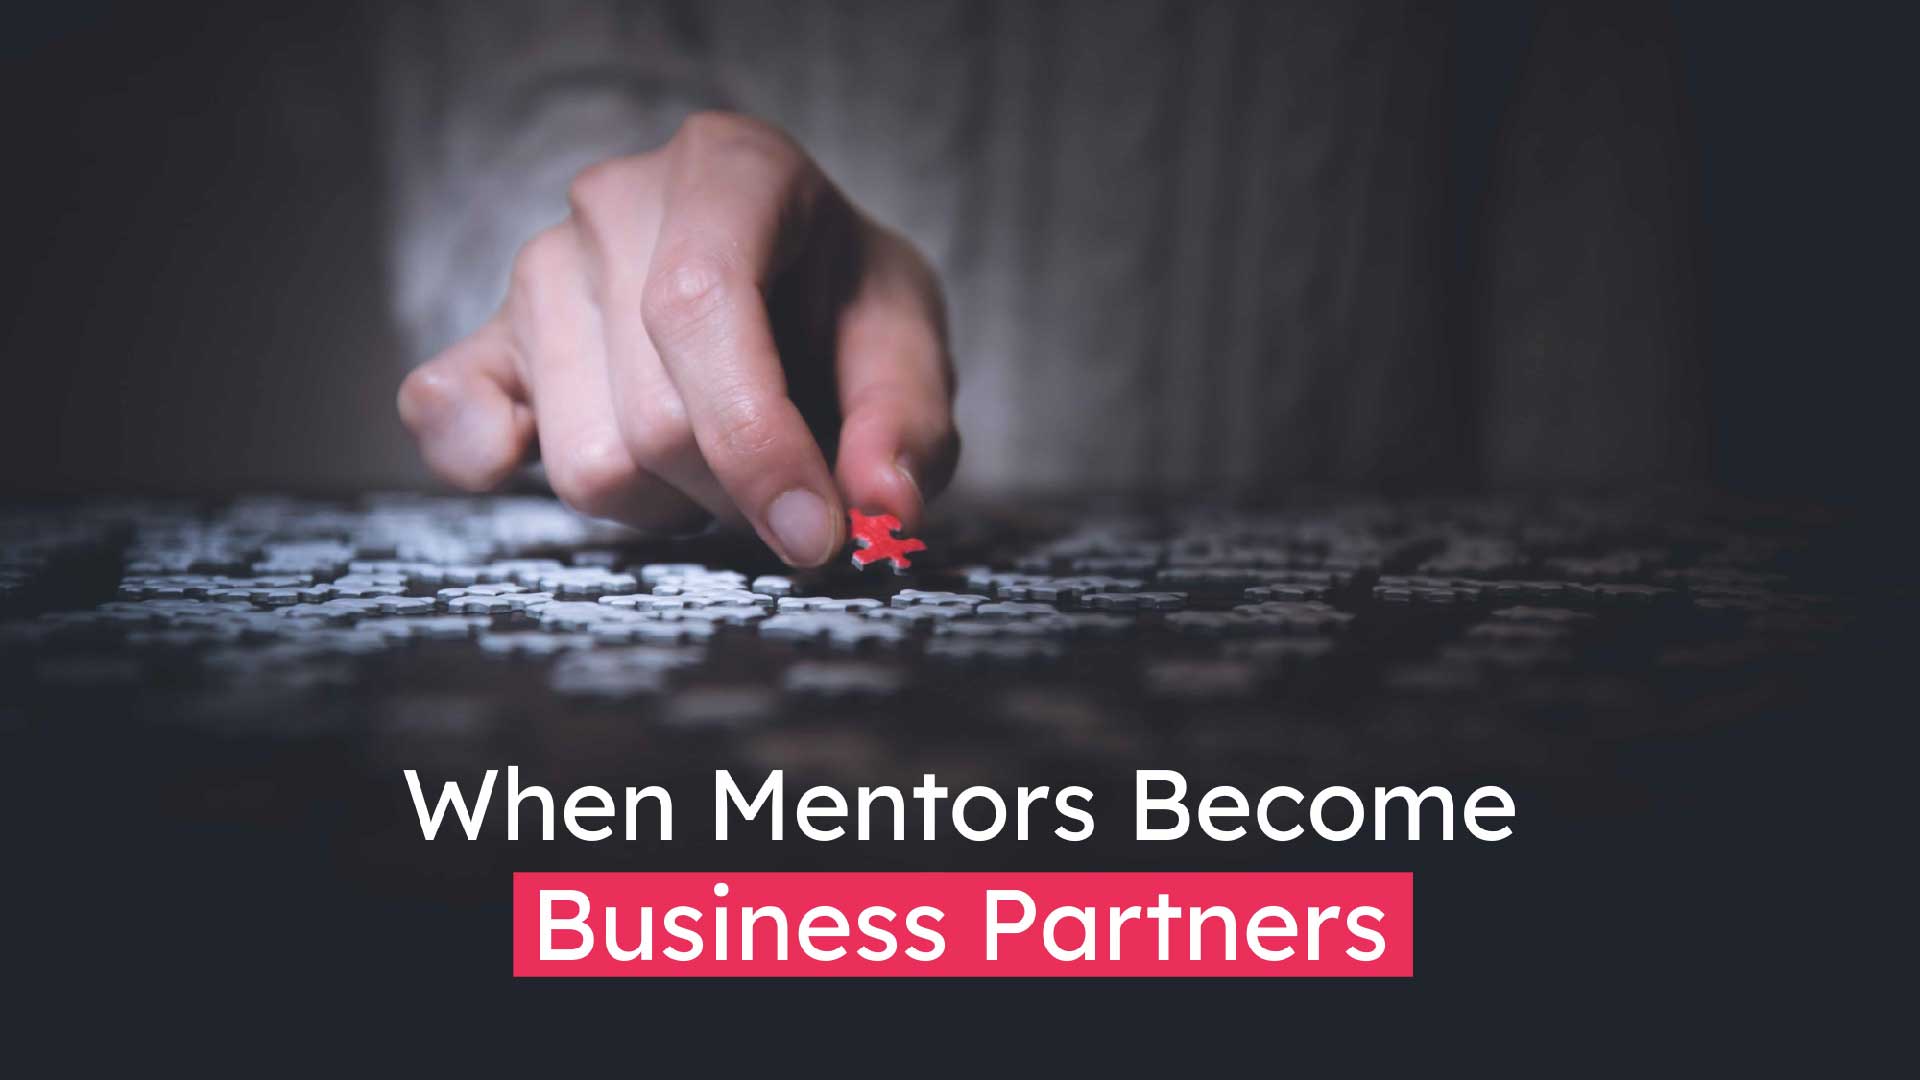 When Mentors Become Business Partners